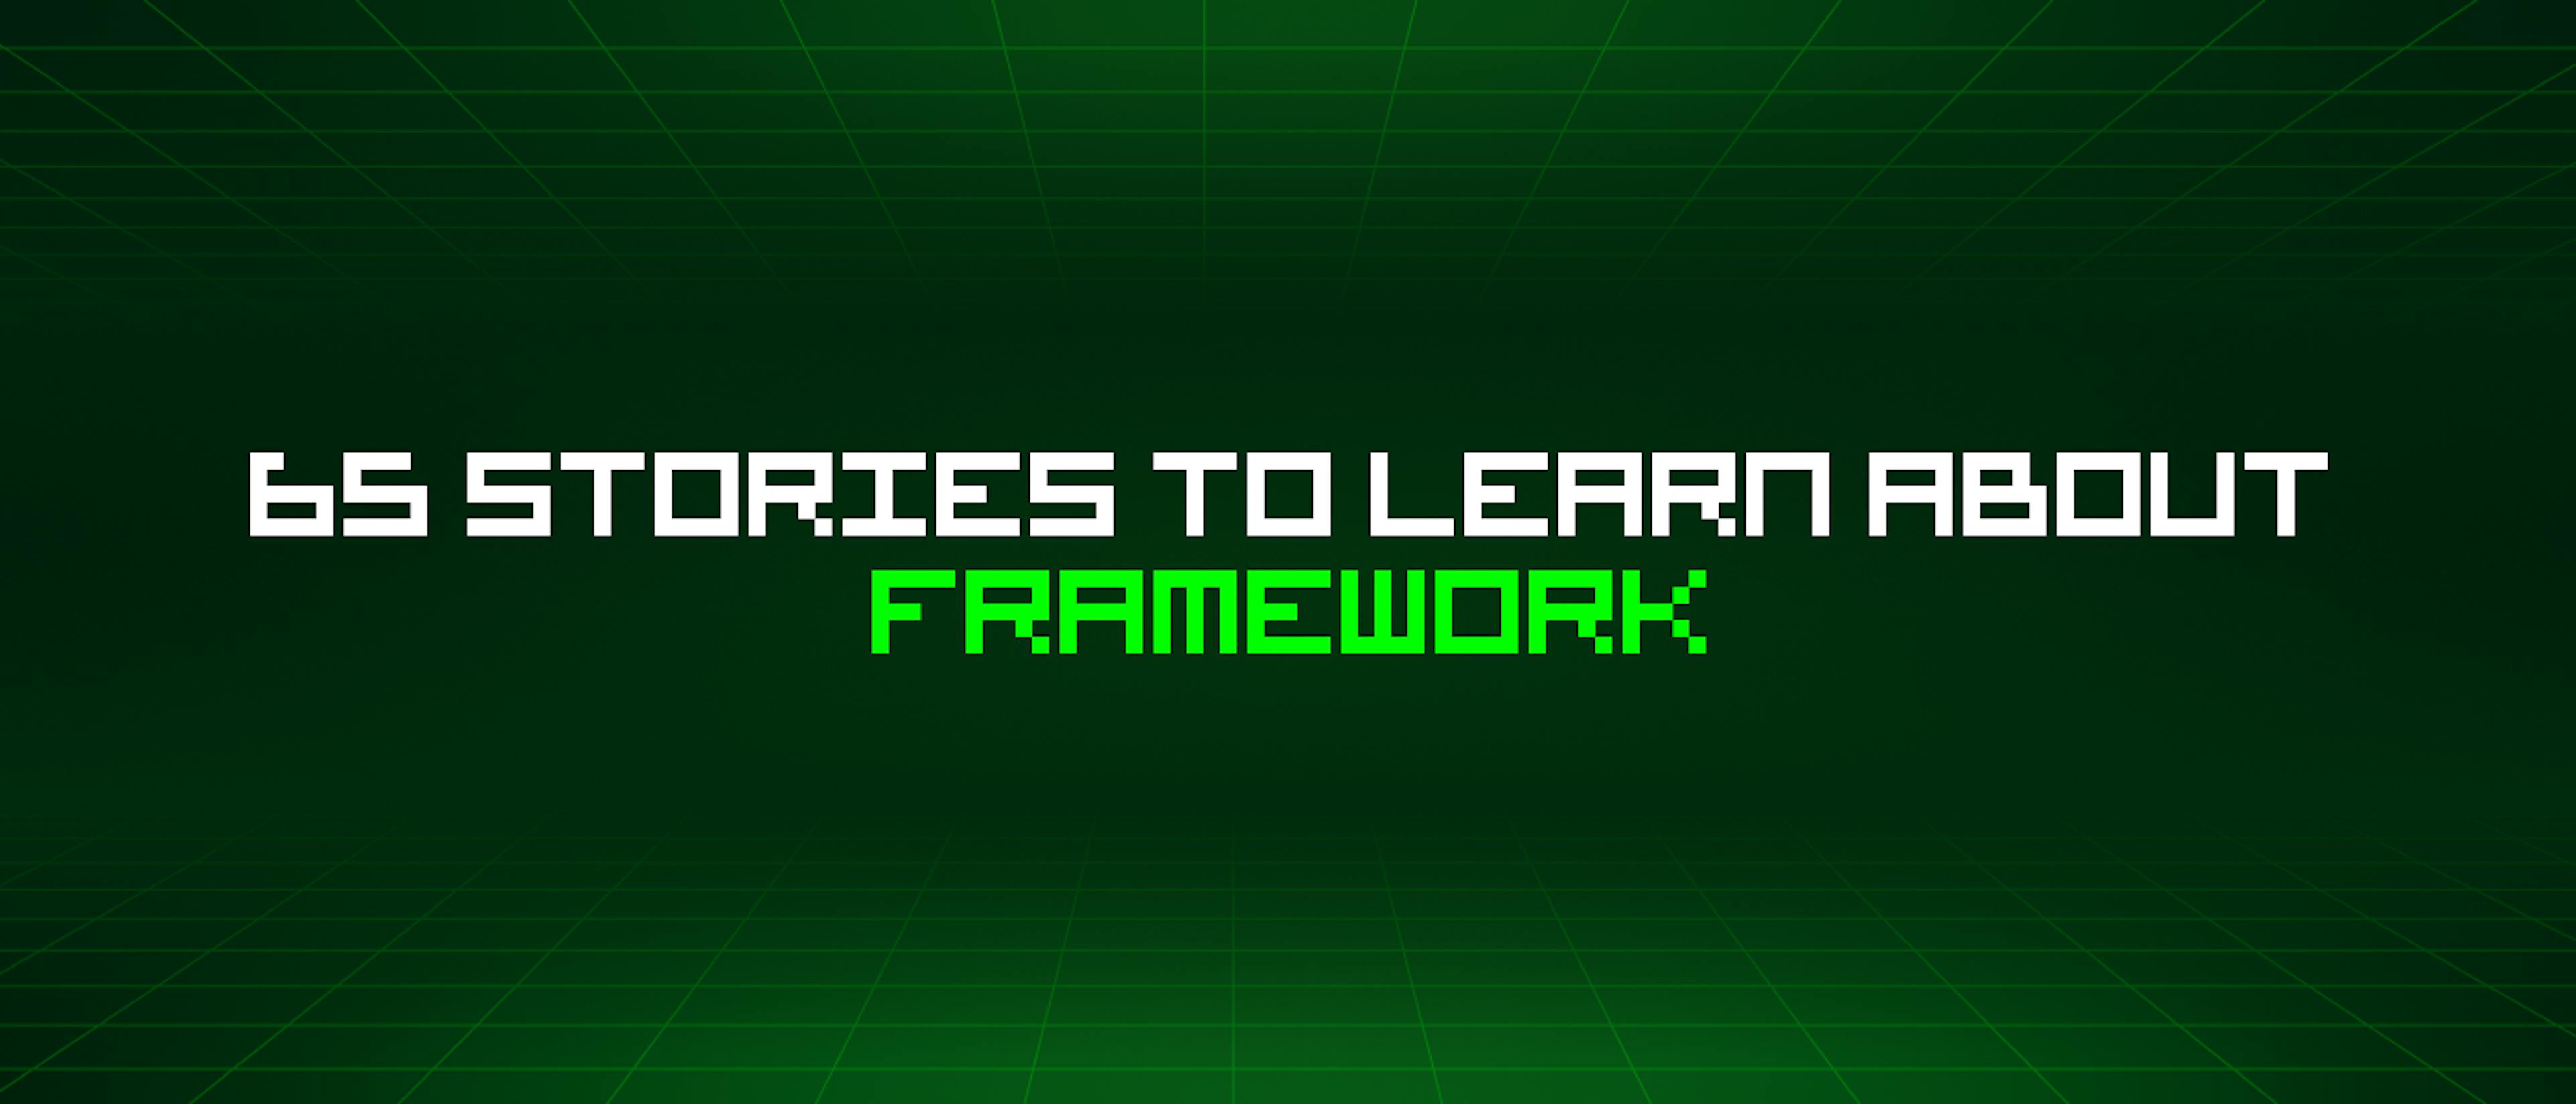 featured image - 65 Stories To Learn About Framework